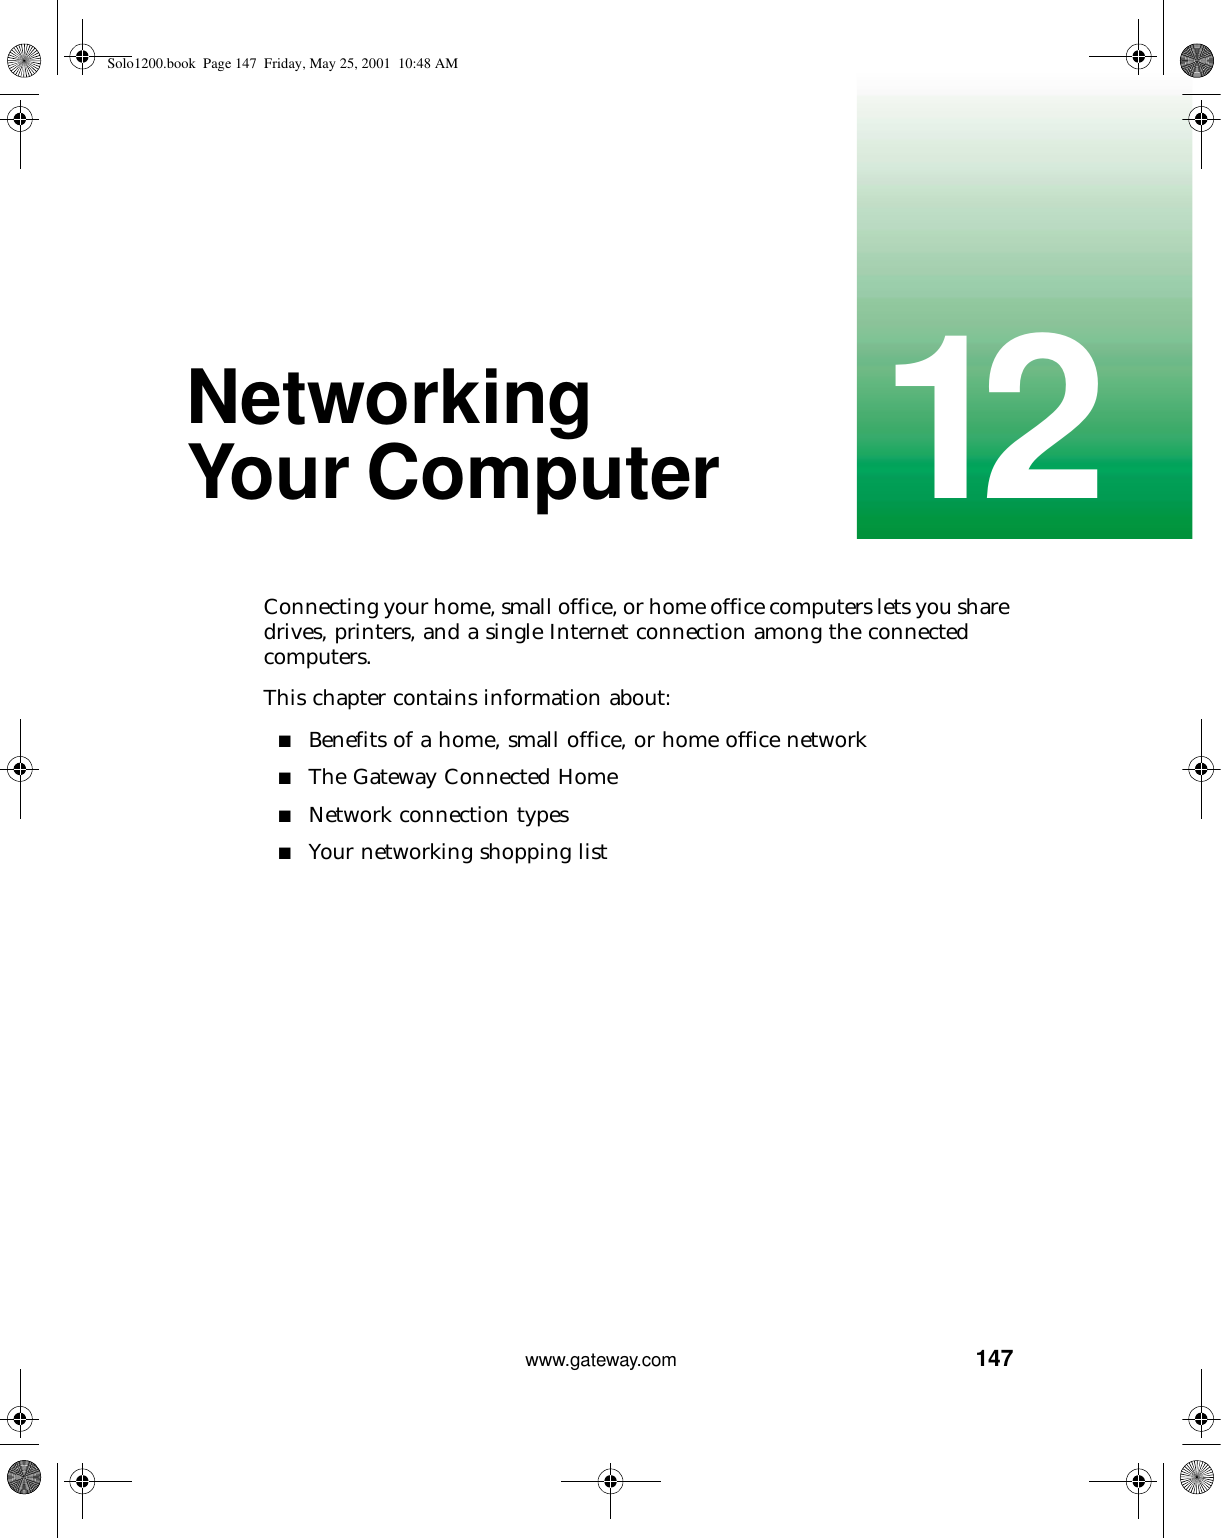 14712www.gateway.comNetworking Your ComputerConnecting your home, small office, or home office computers lets you share drives, printers, and a single Internet connection among the connected computers.This chapter contains information about:■Benefits of a home, small office, or home office network■The Gateway Connected Home■Network connection types■Your networking shopping listSolo1200.book Page 147 Friday, May 25, 2001 10:48 AM